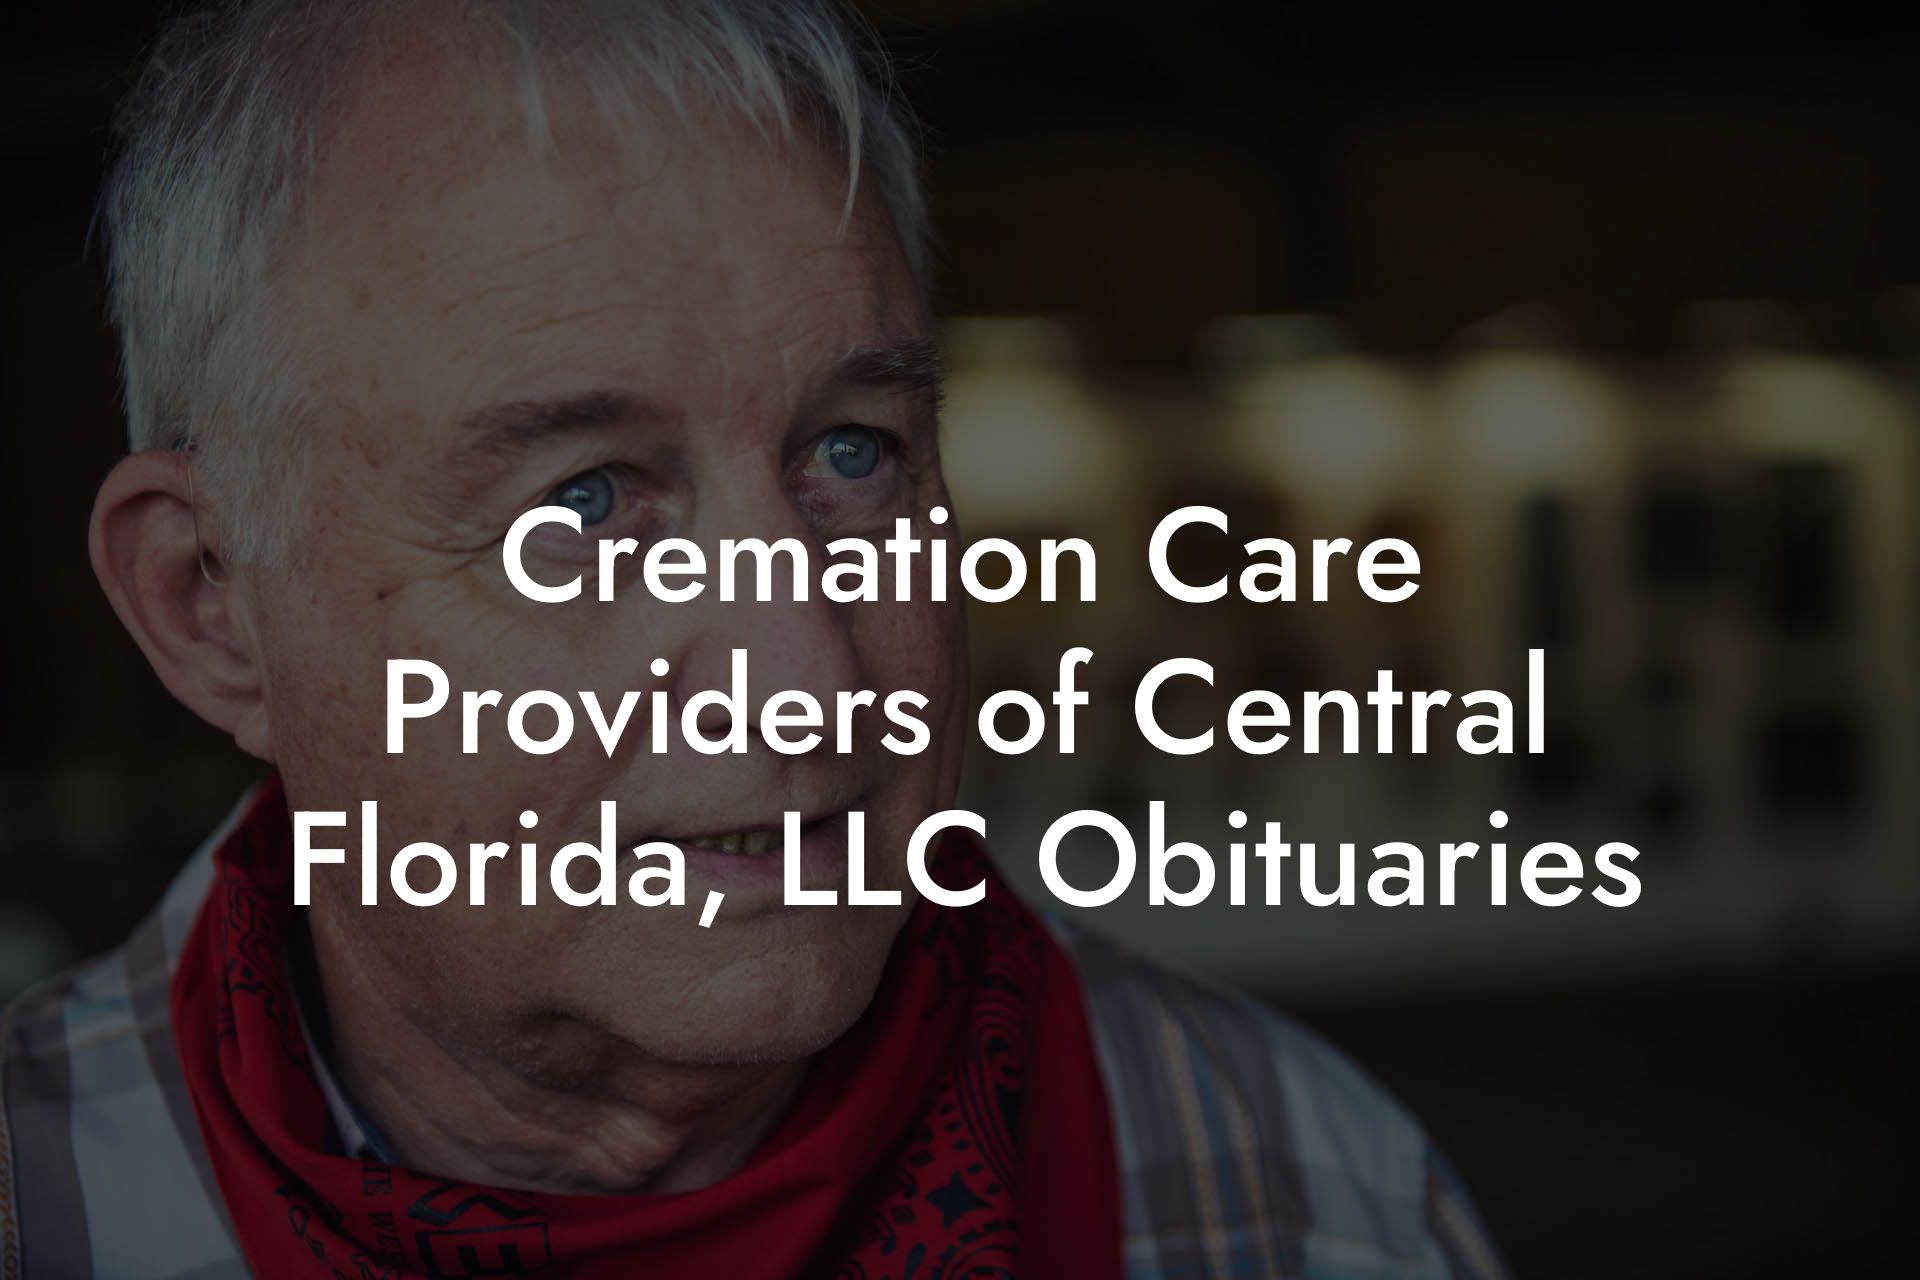 Cremation Care Providers of Central Florida, LLC Obituaries